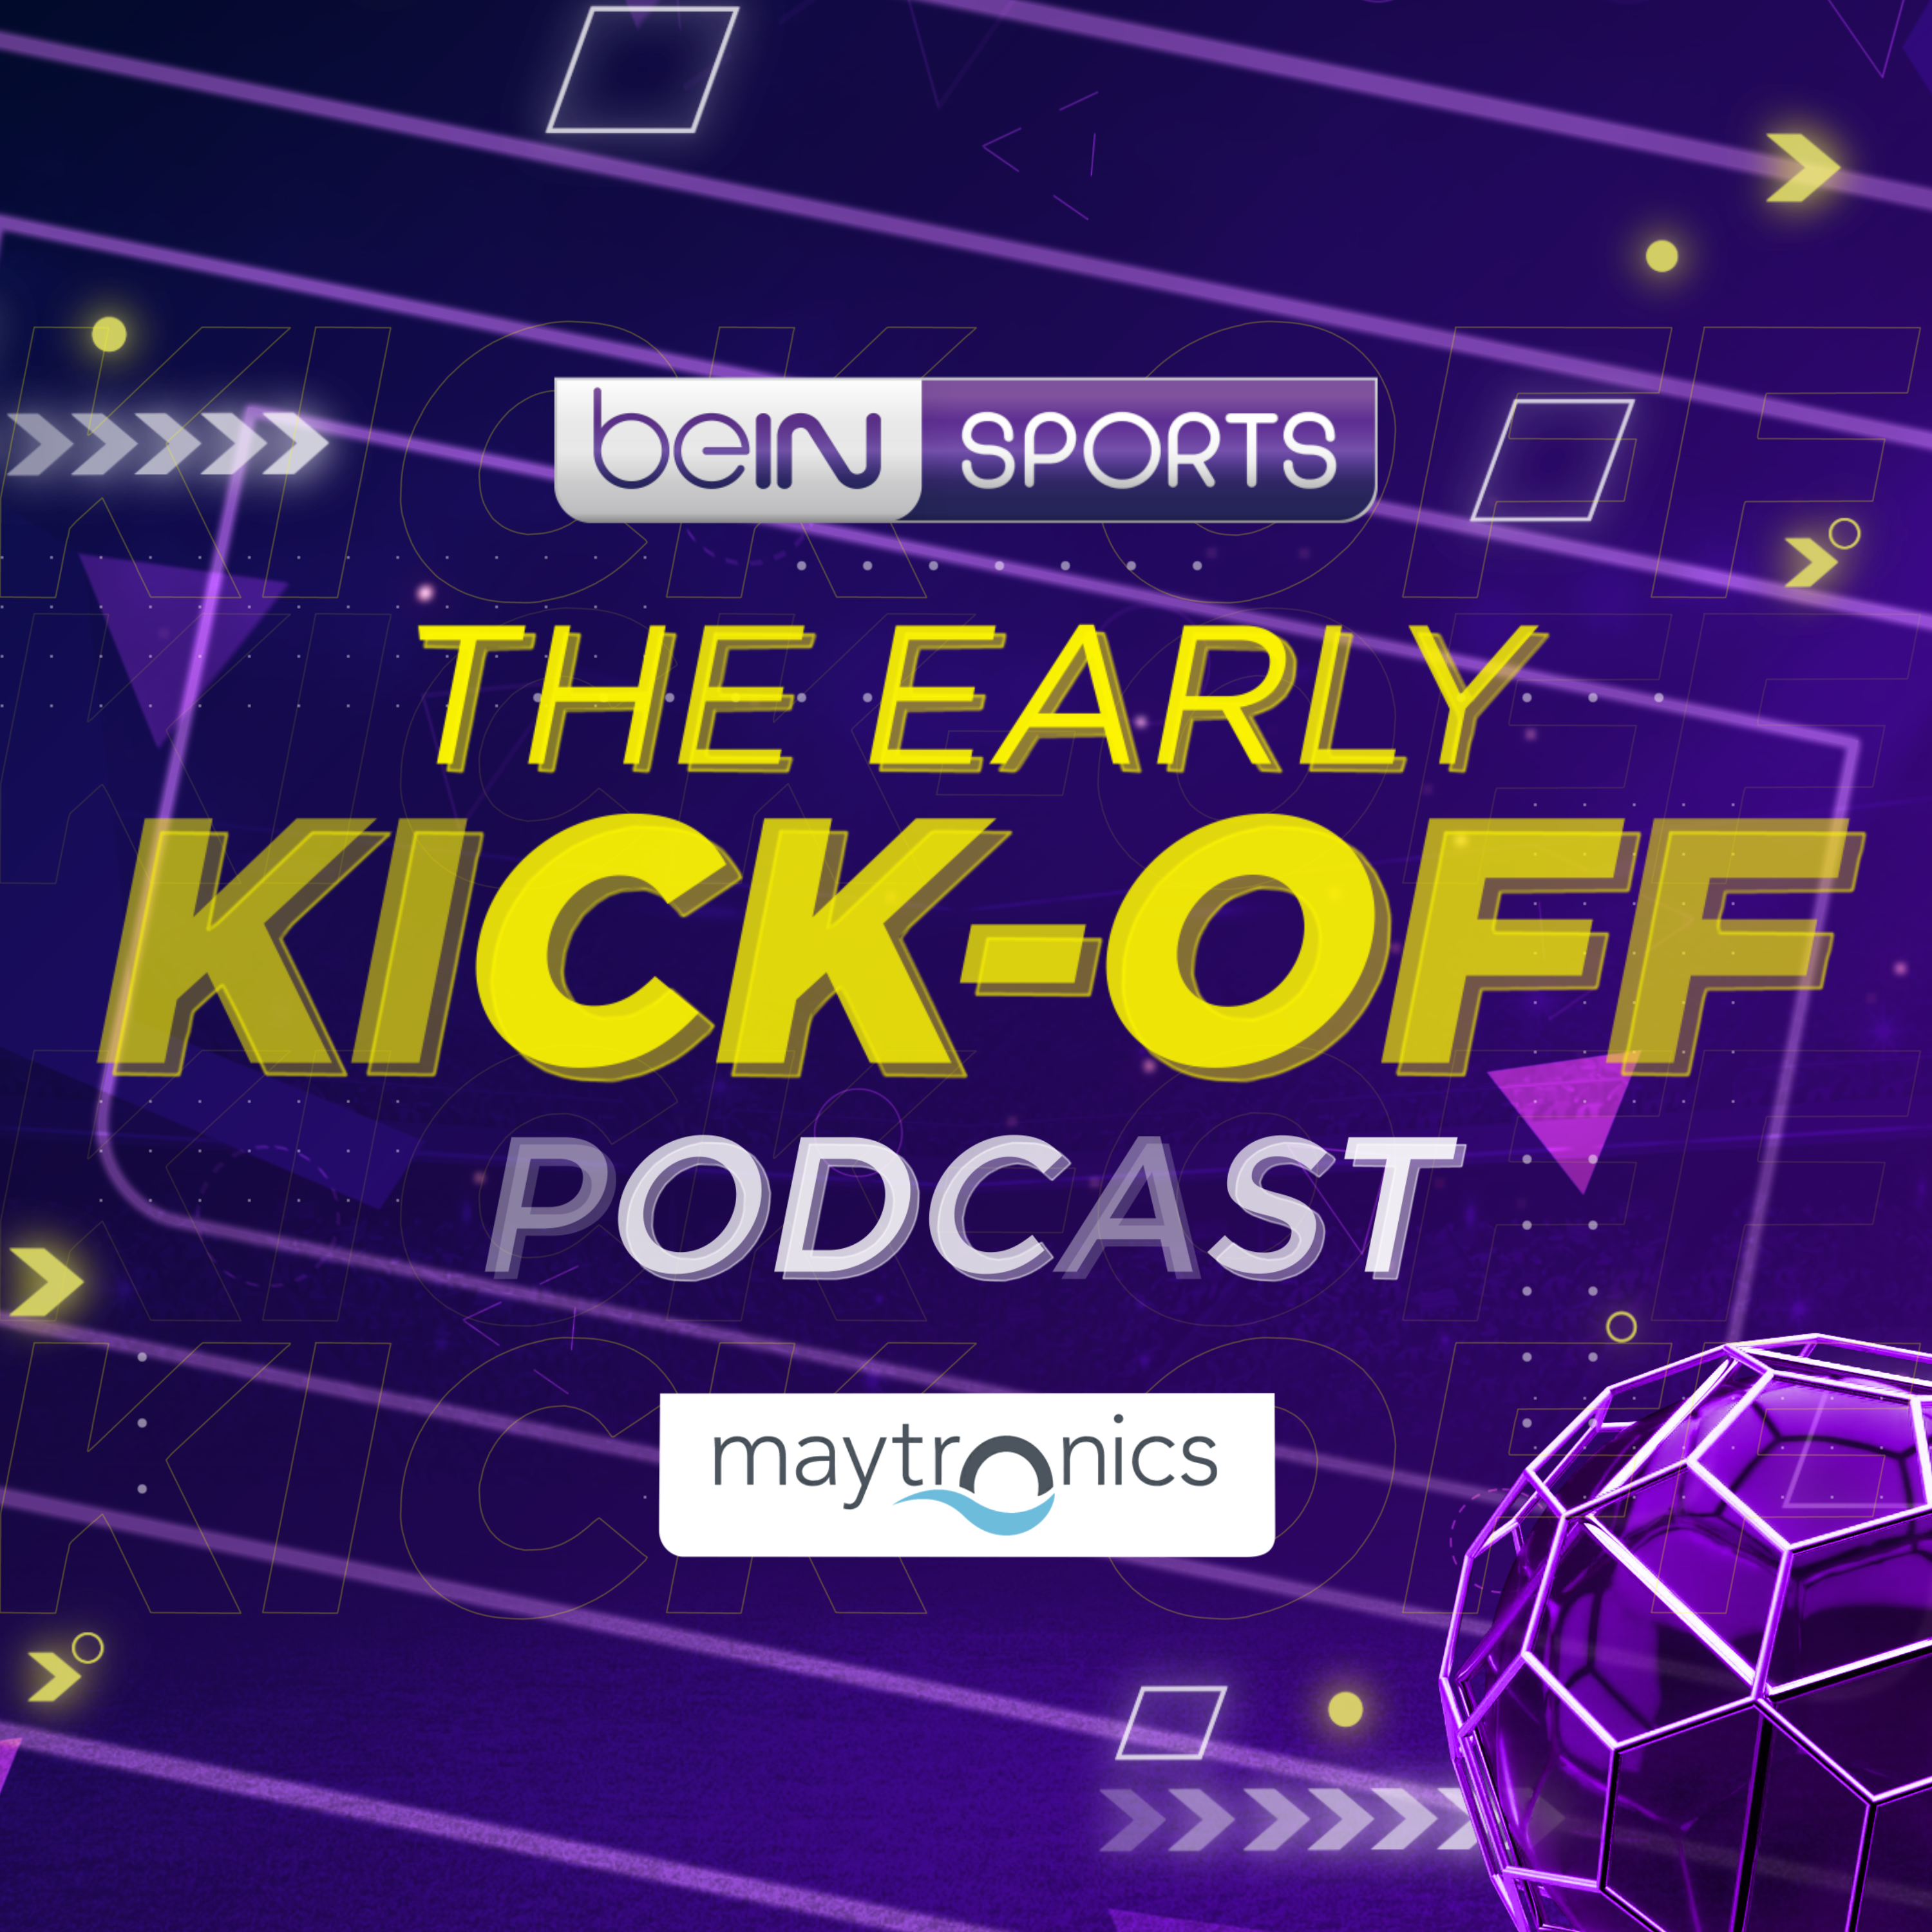 The Early Kick-Off Podcast